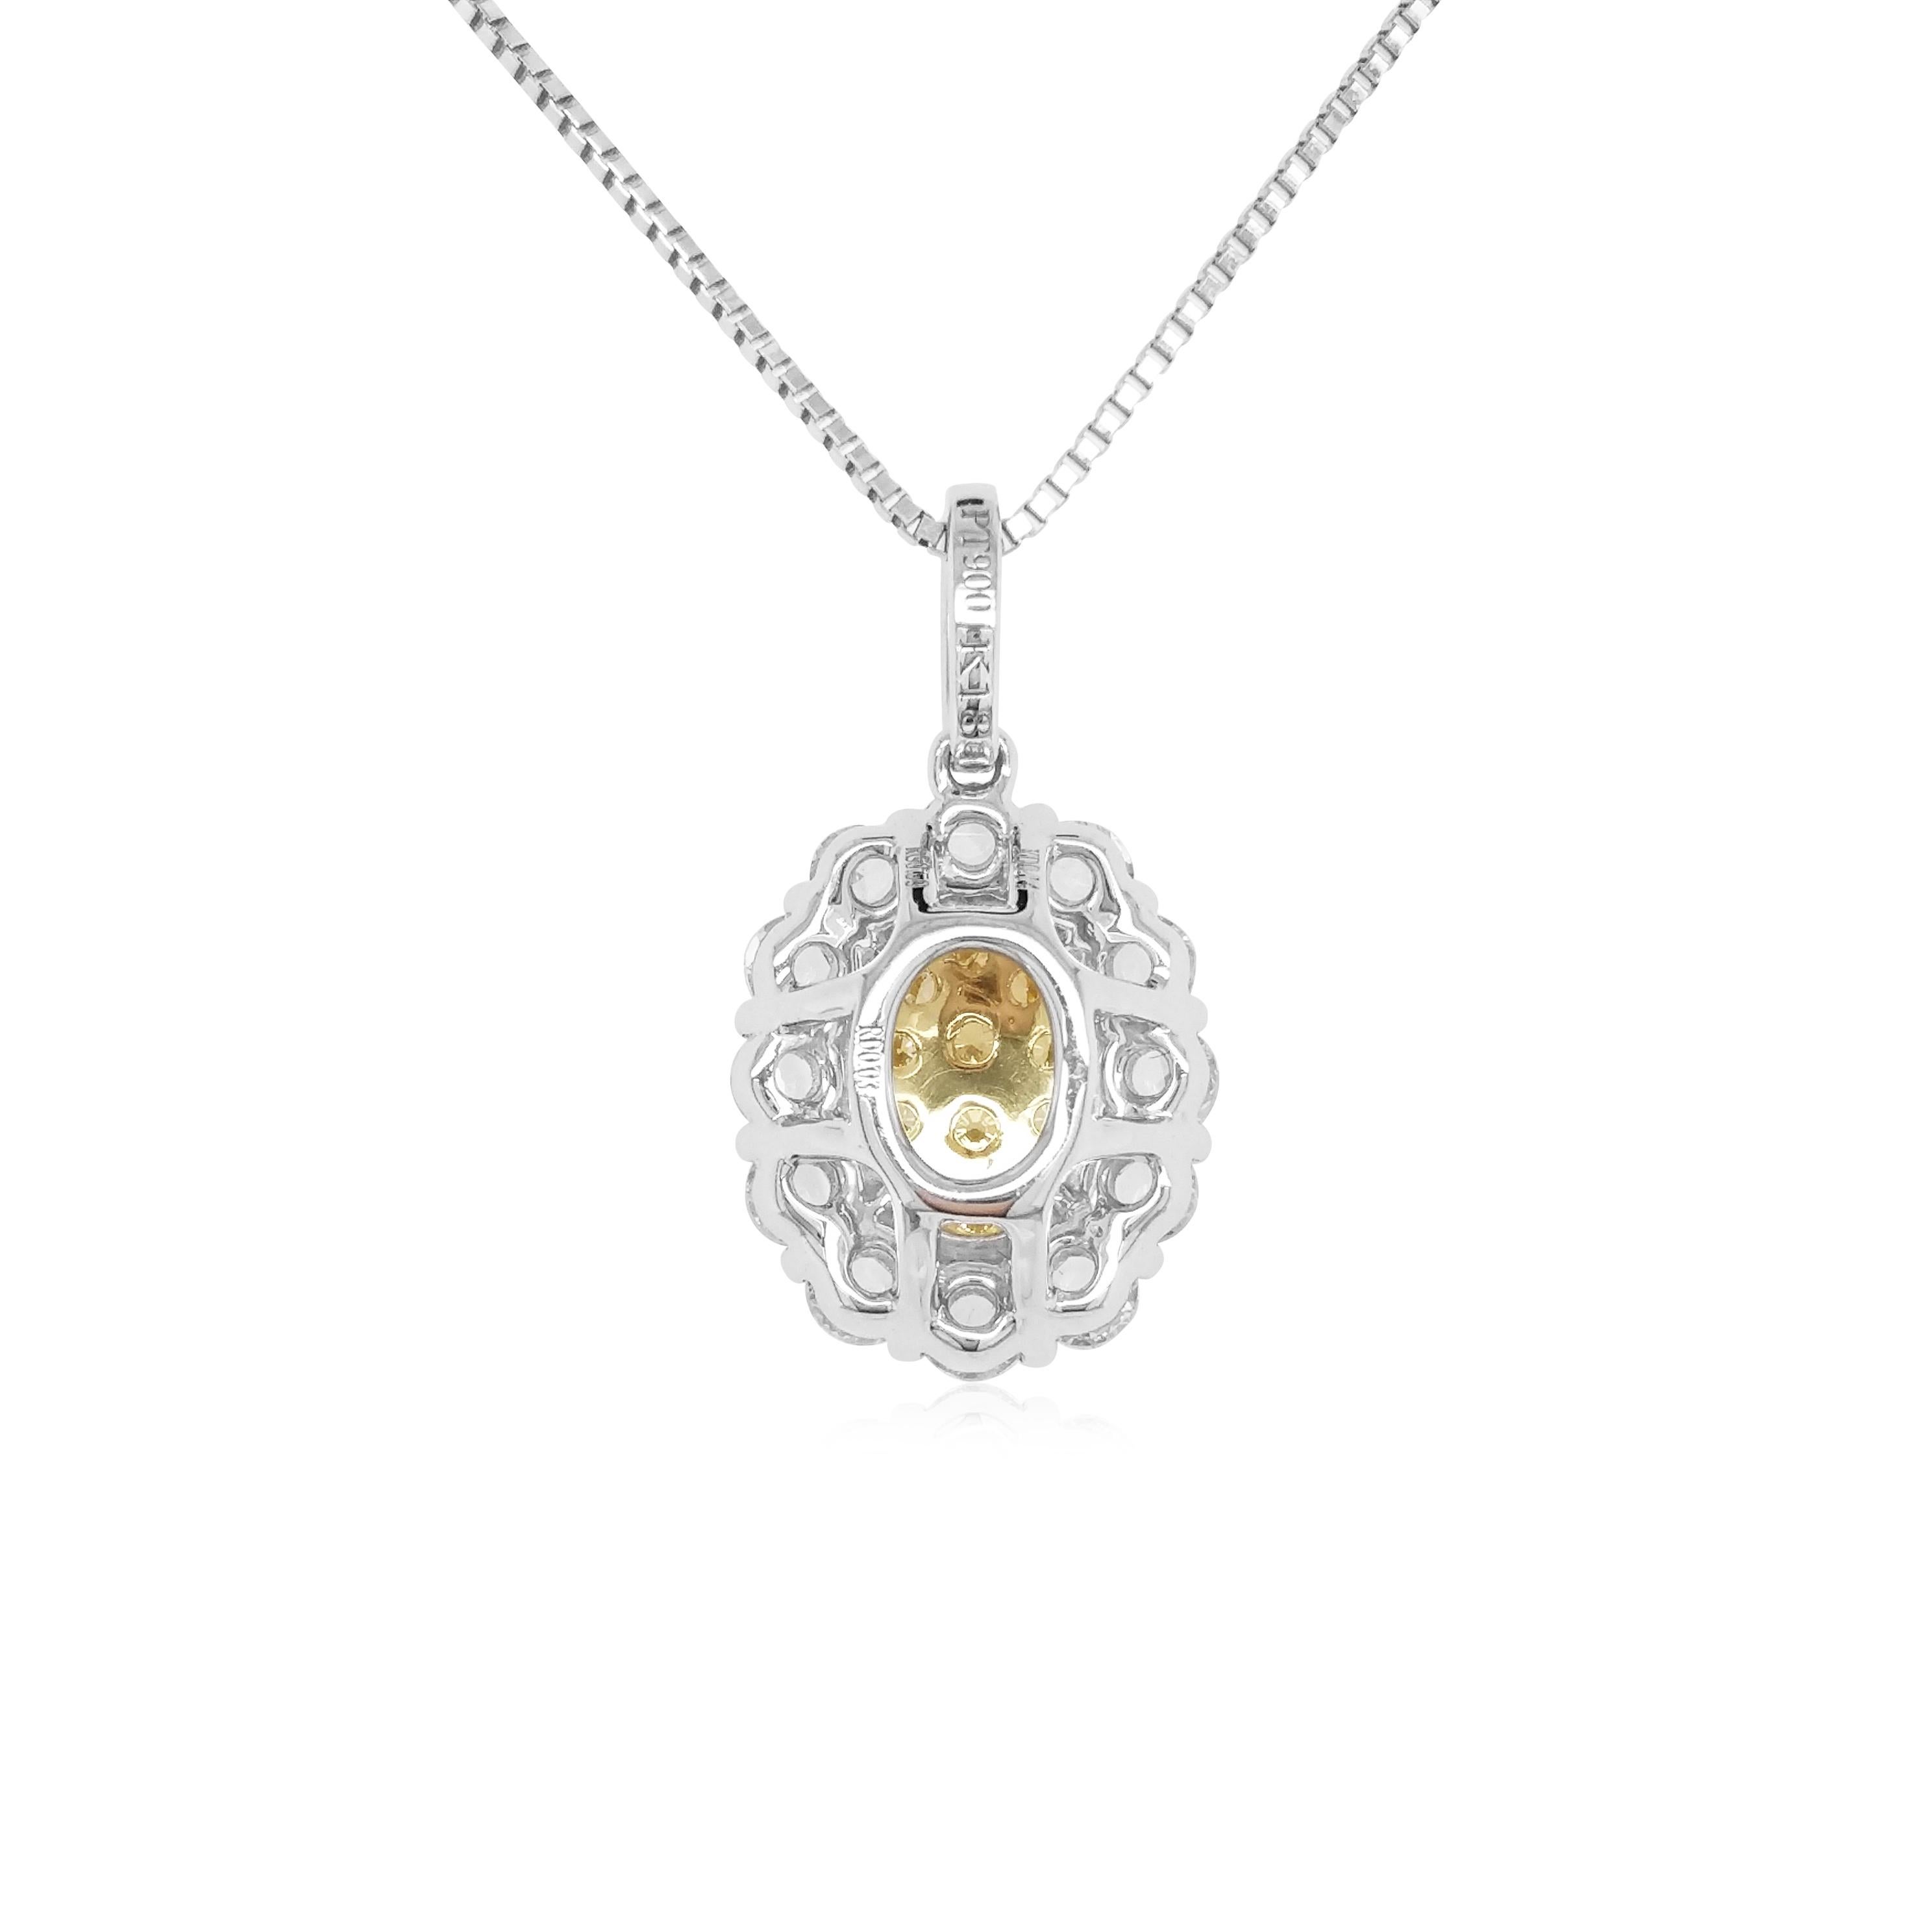 This mesmeric platinum pendant features natural Yellow diamonds at its forefront, accentuated by a halo of glistening Rose-cut white diamonds which surrounds it. Bold, yet intricate, this one-of-a-kind pendant will add a sumptuous touch of colour to